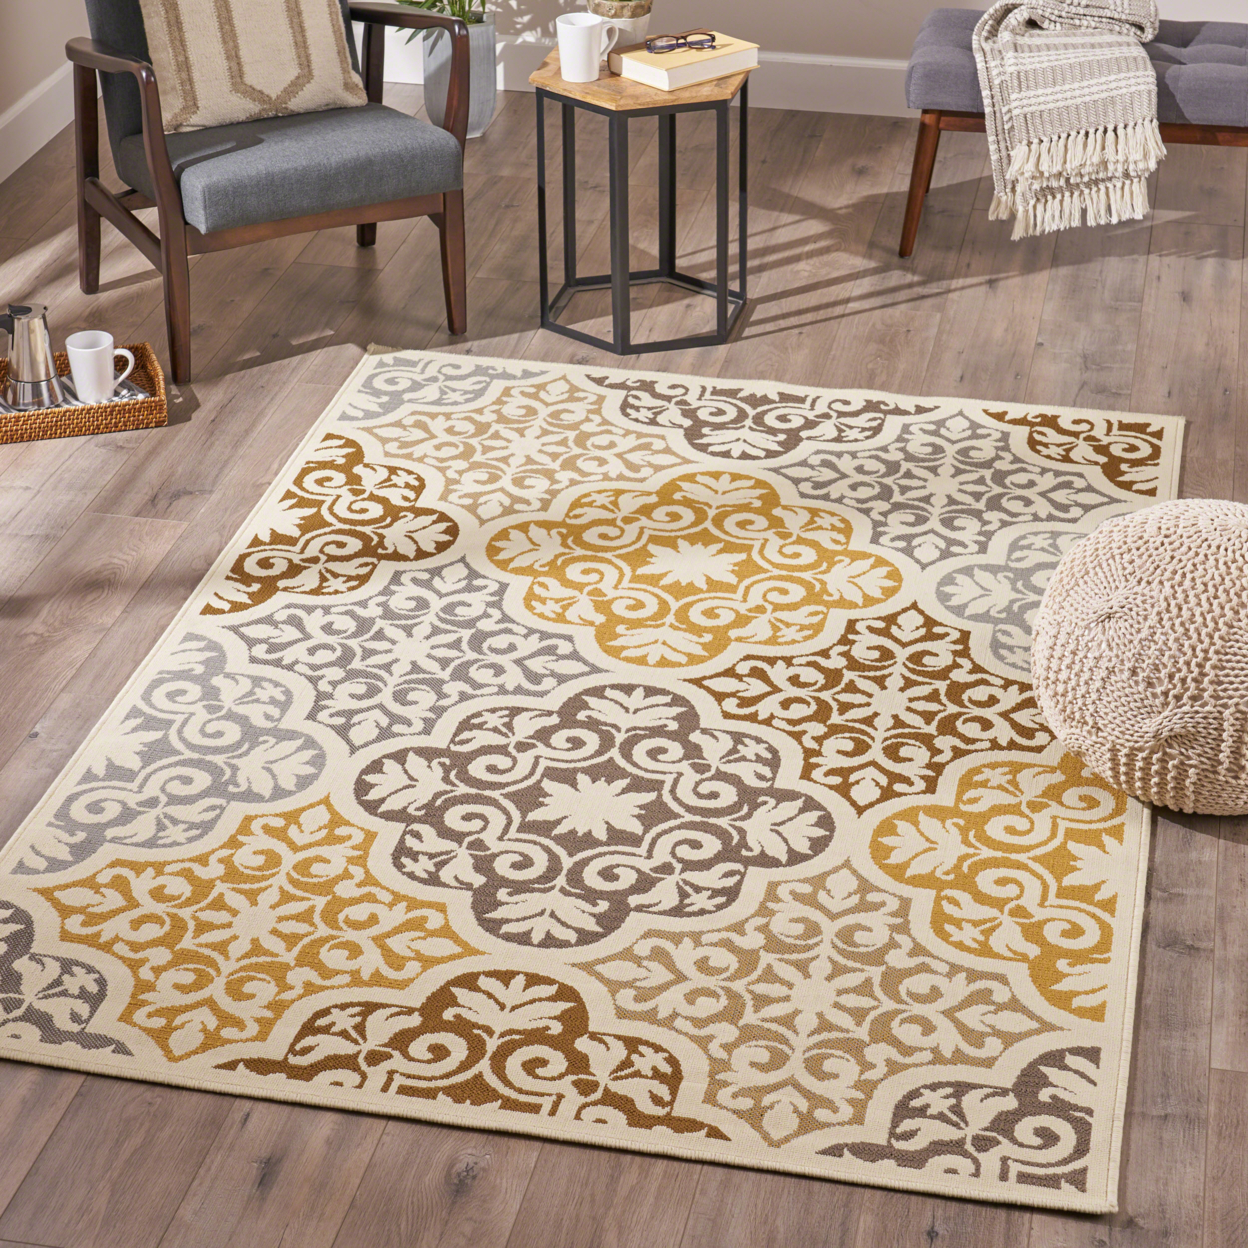 Mars Indoor Floral Area Rug, Ivory And Gray - Ivory + Gray, 8' X 11'